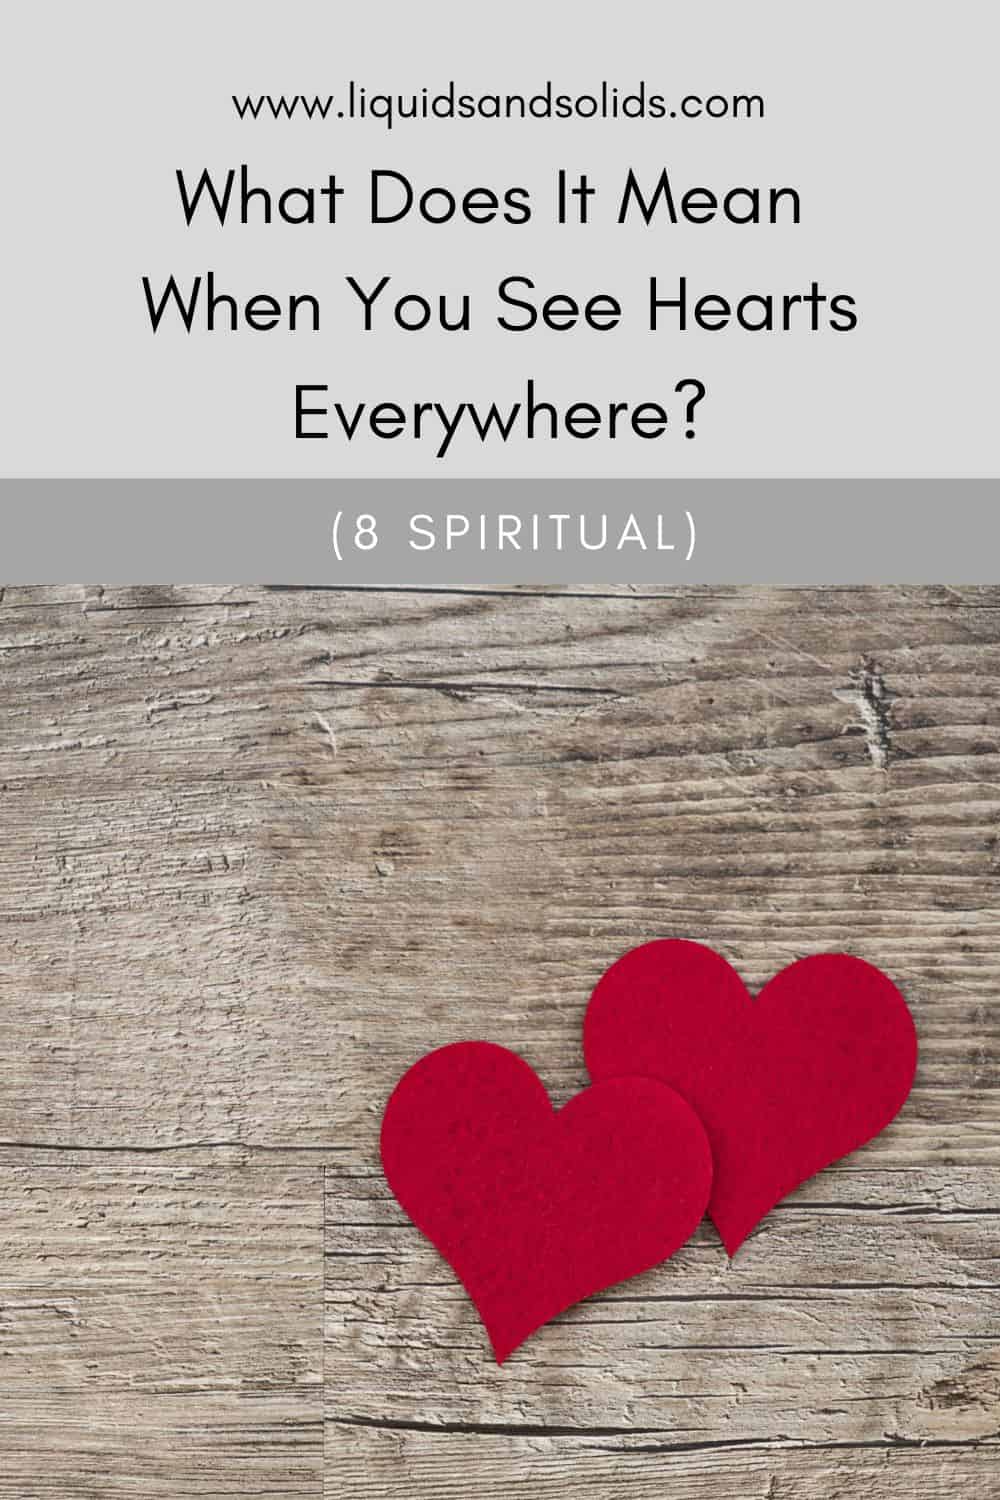 What Does It Mean When You See Hearts Everywhere? (8 Spiritual)